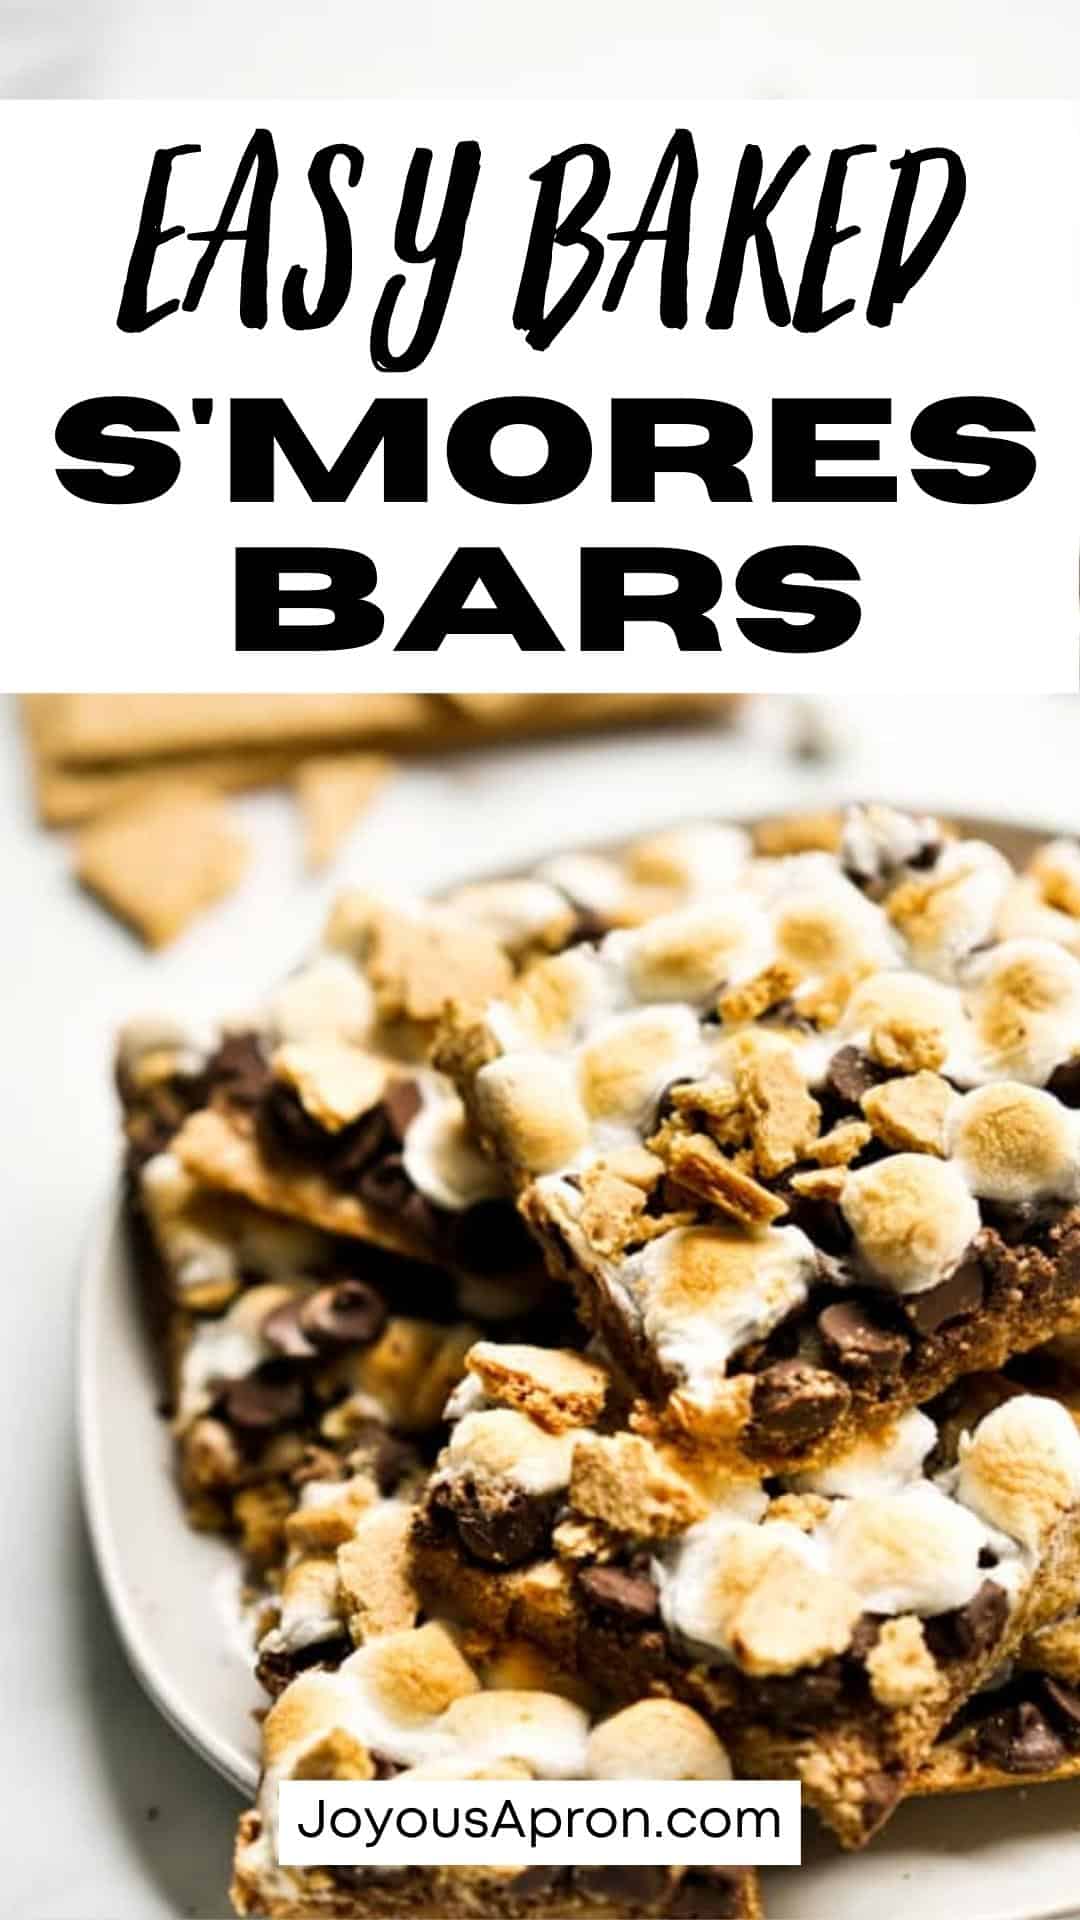 S'mores Bar - Easy and yummy dessert bars layered with everything you love in S'mores - graham cracker, marshmallow and chocolate! So delicious! via @joyousapron